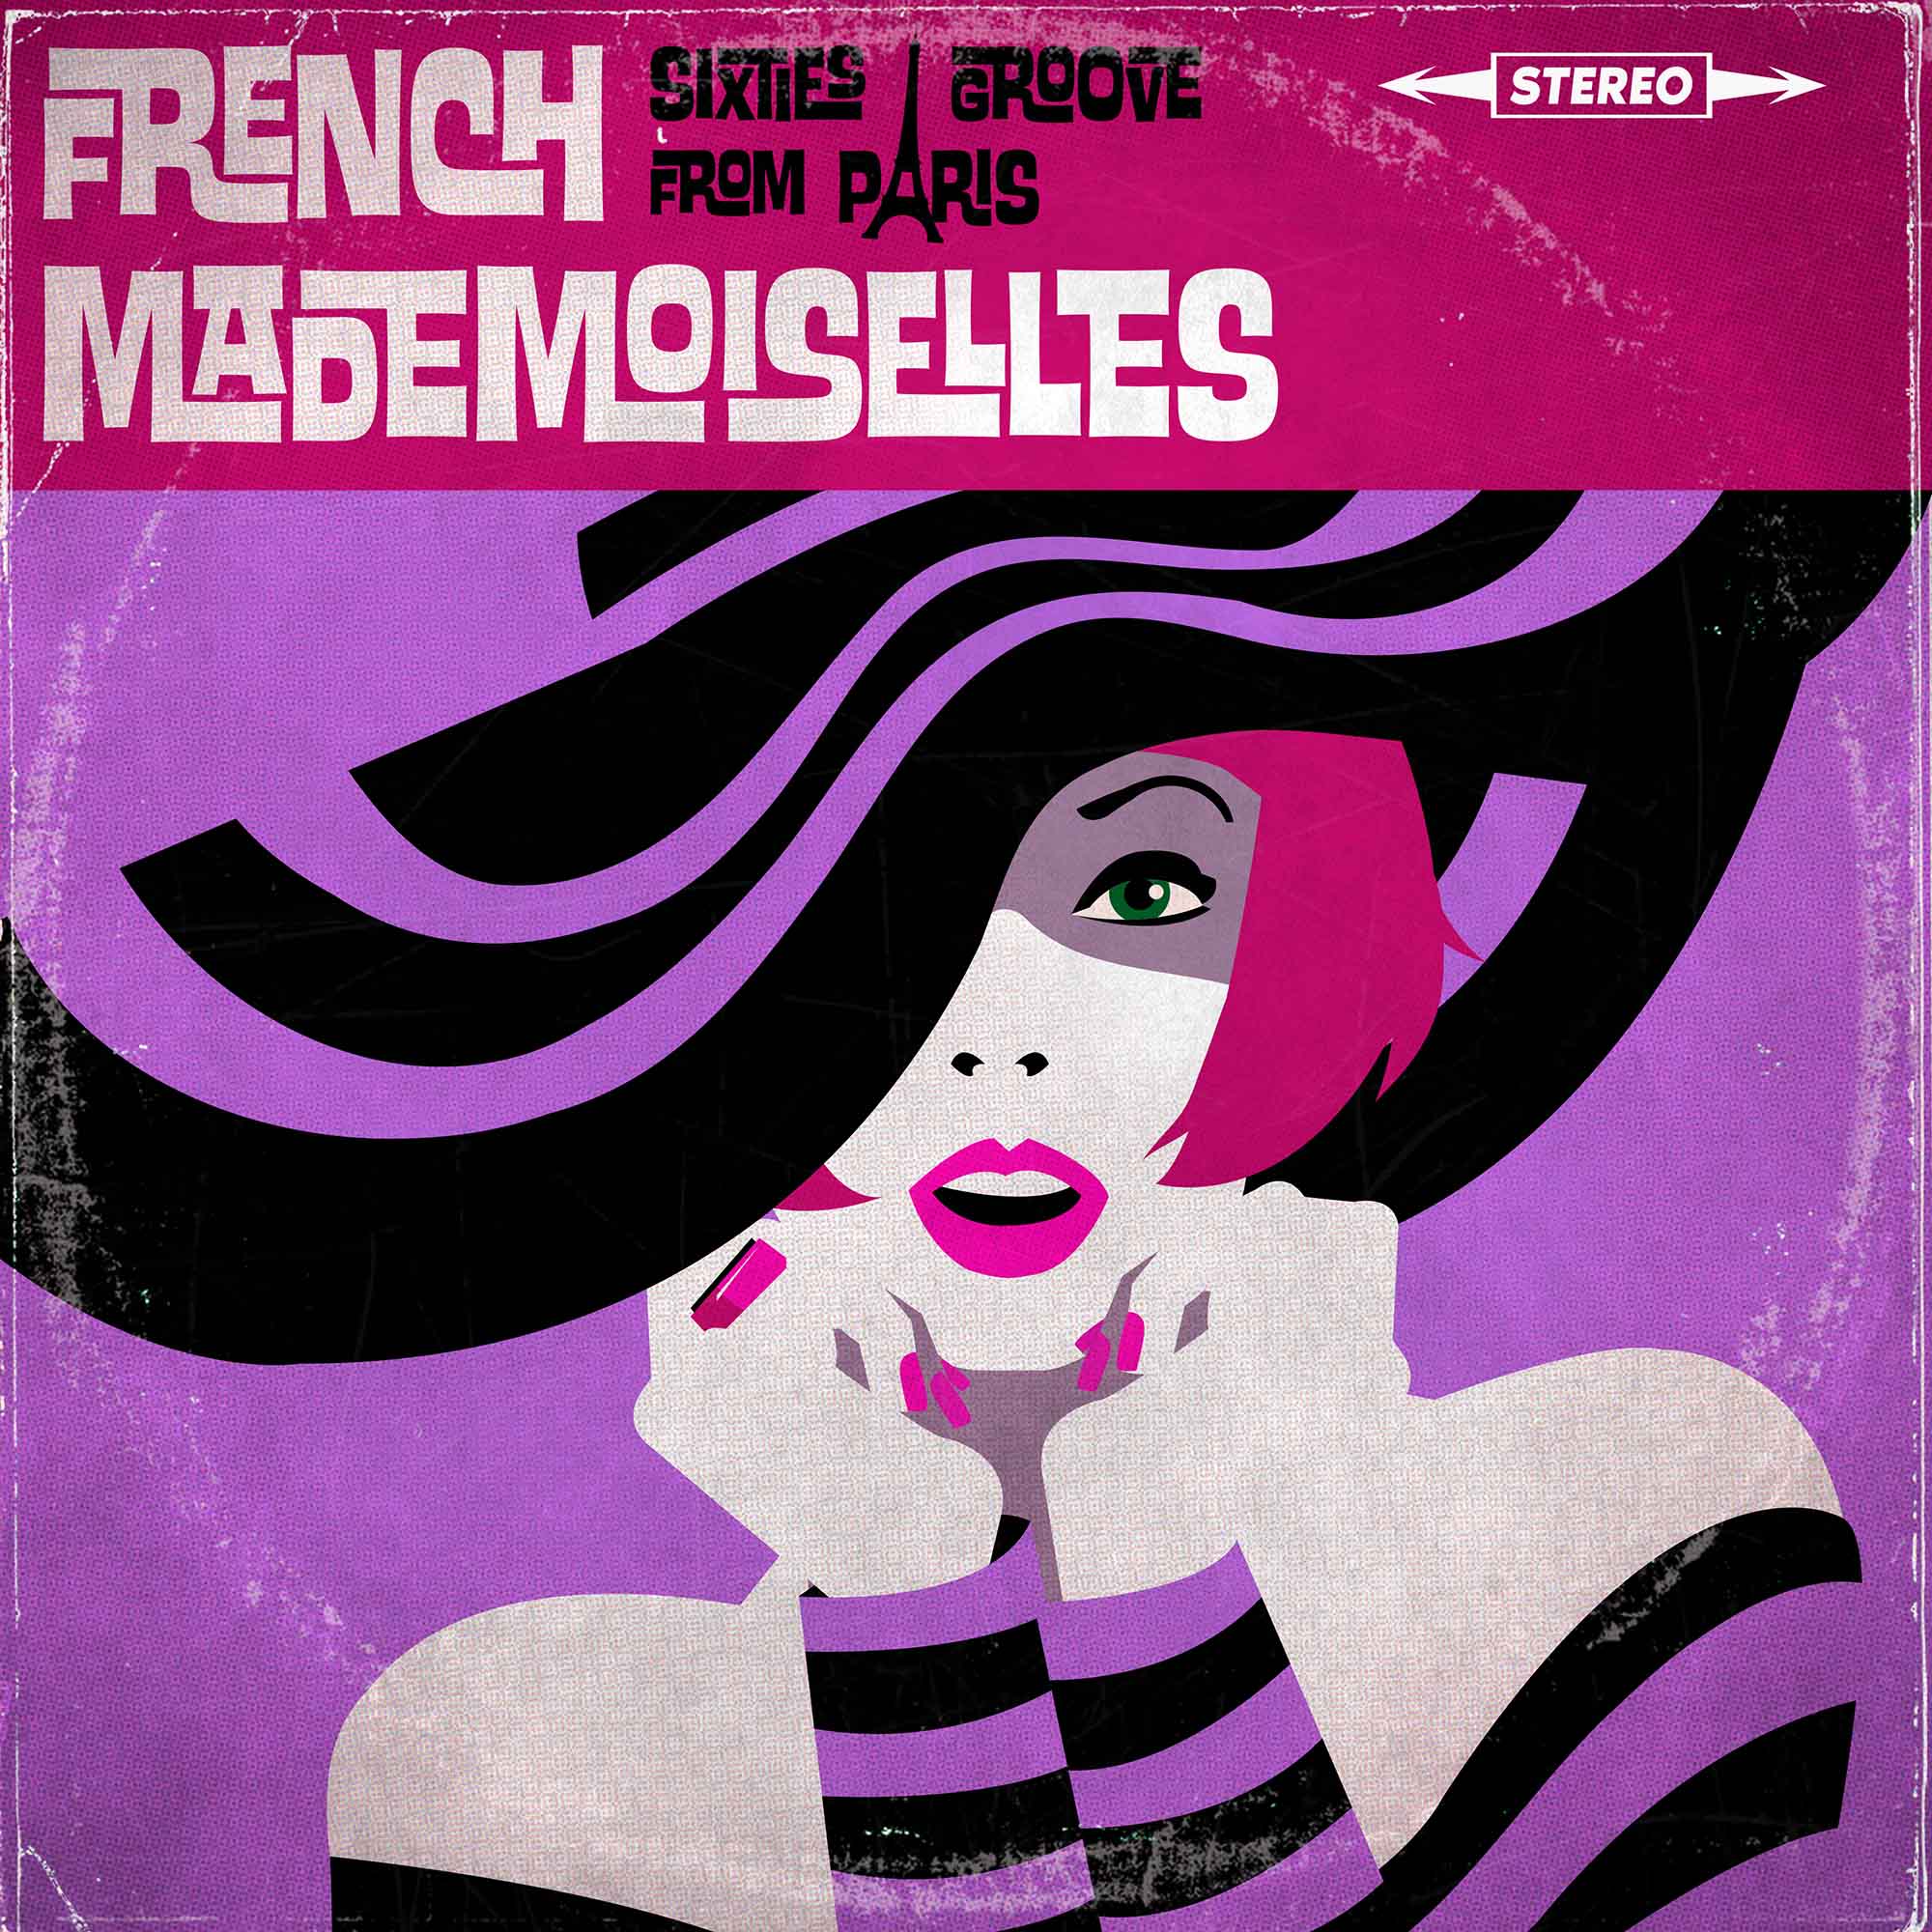 SIXTIES GROOVE FROM PARIS  ©The French Mademoiselles